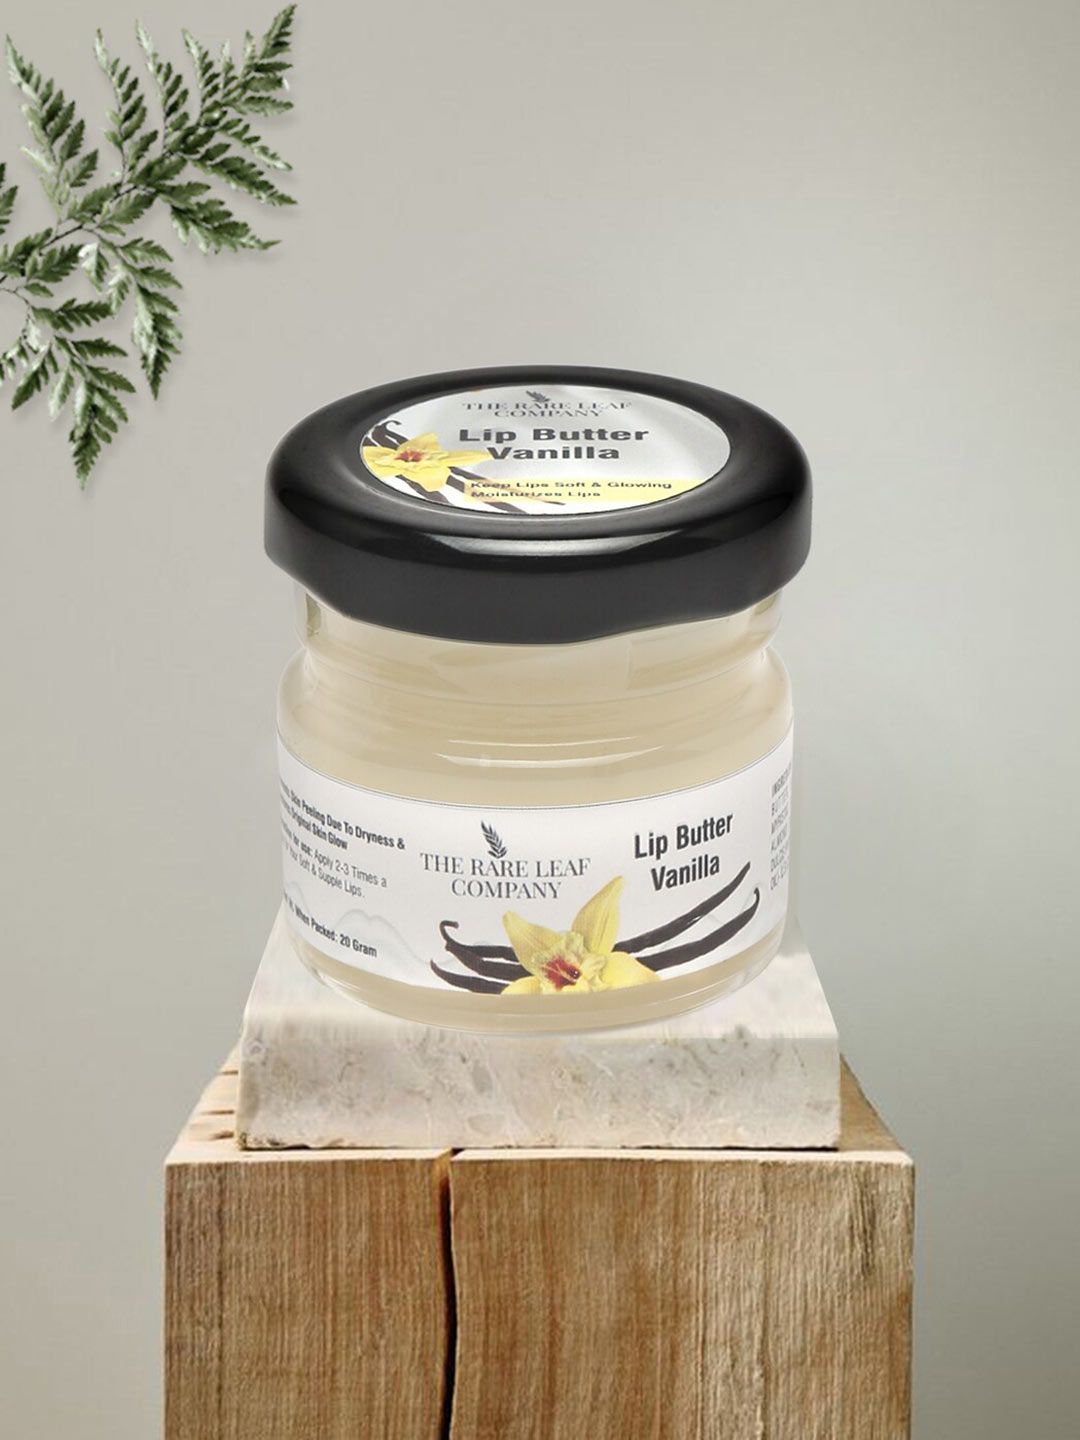 THE RARE LEAF COMPANY Natural UV Protection Lip Butter 20 g - Vanilla Price in India